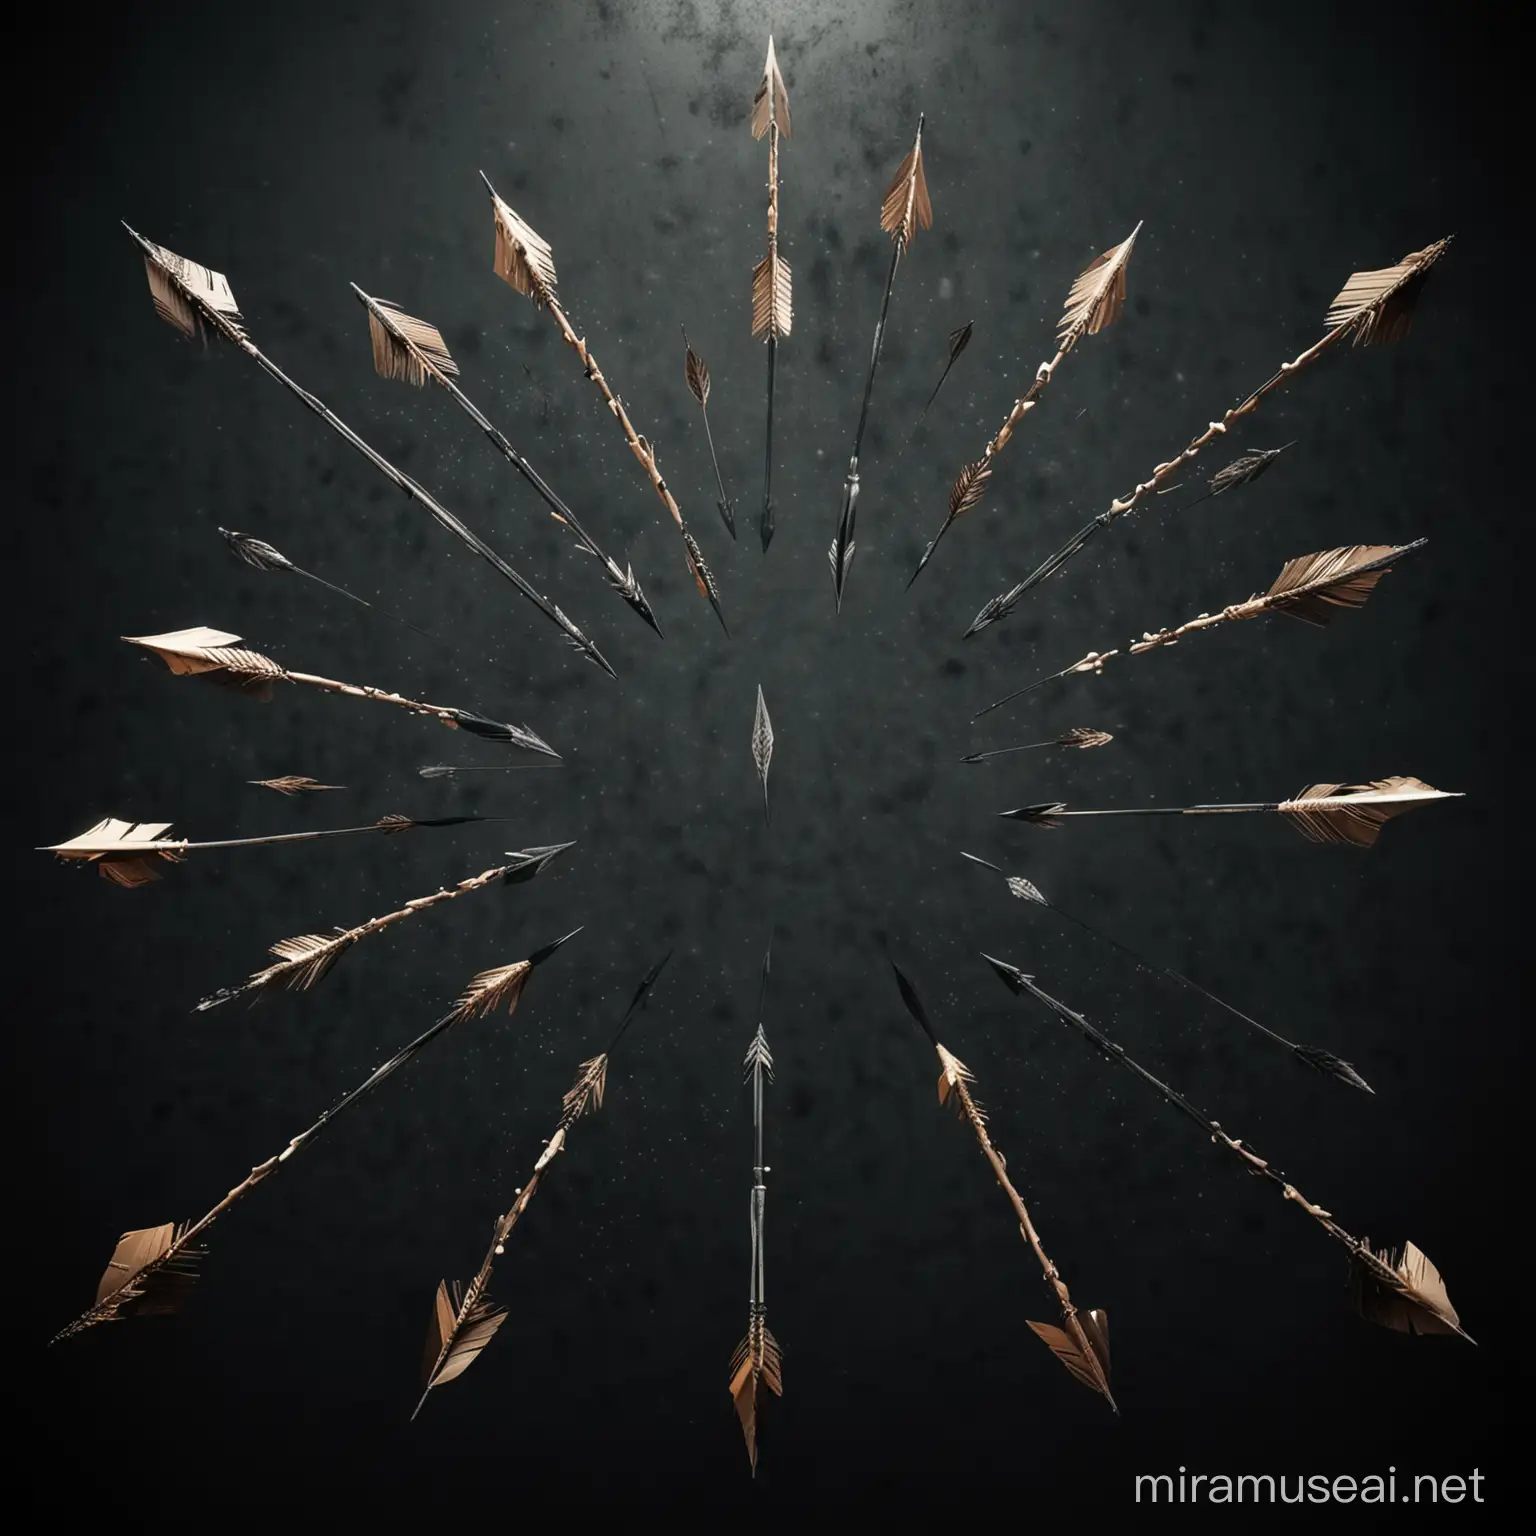 Intense Archery Action Arrows Aimed at the Viewer on Dark Background